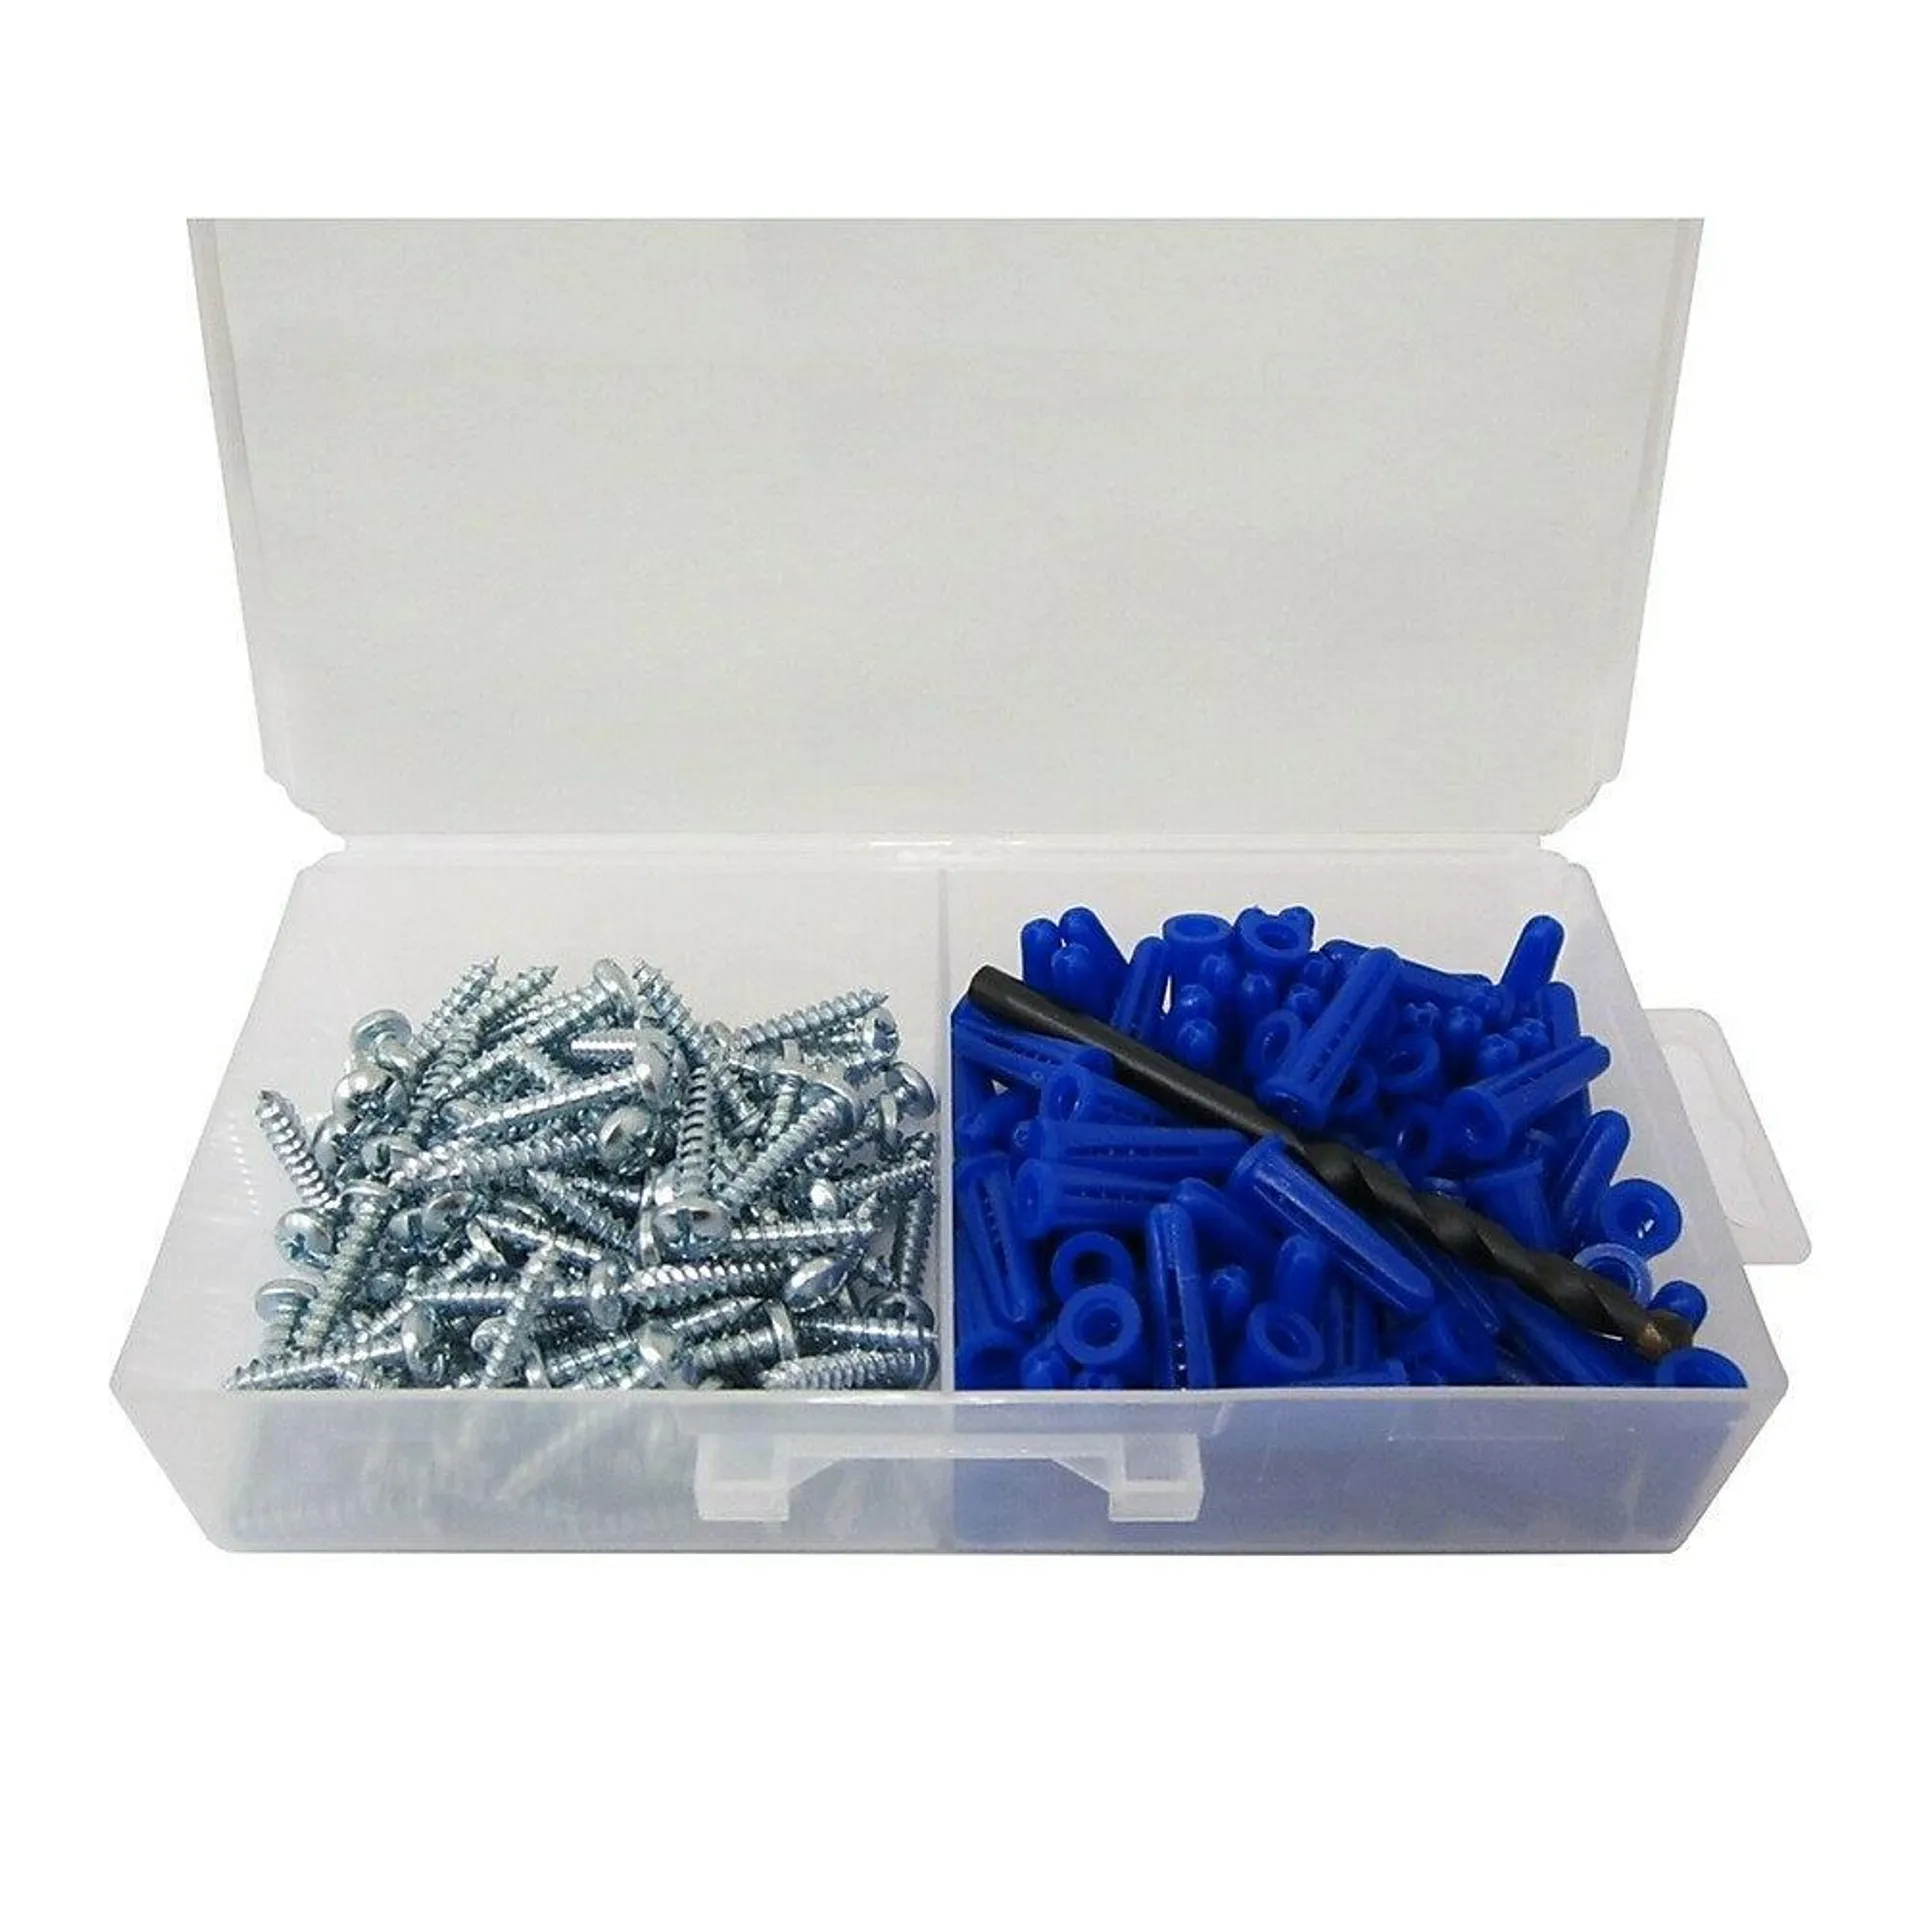 Digiwave Pan Screw & Anchor Kit, 5.5" x 5.5" x 39.4", Silver, 100/Pack